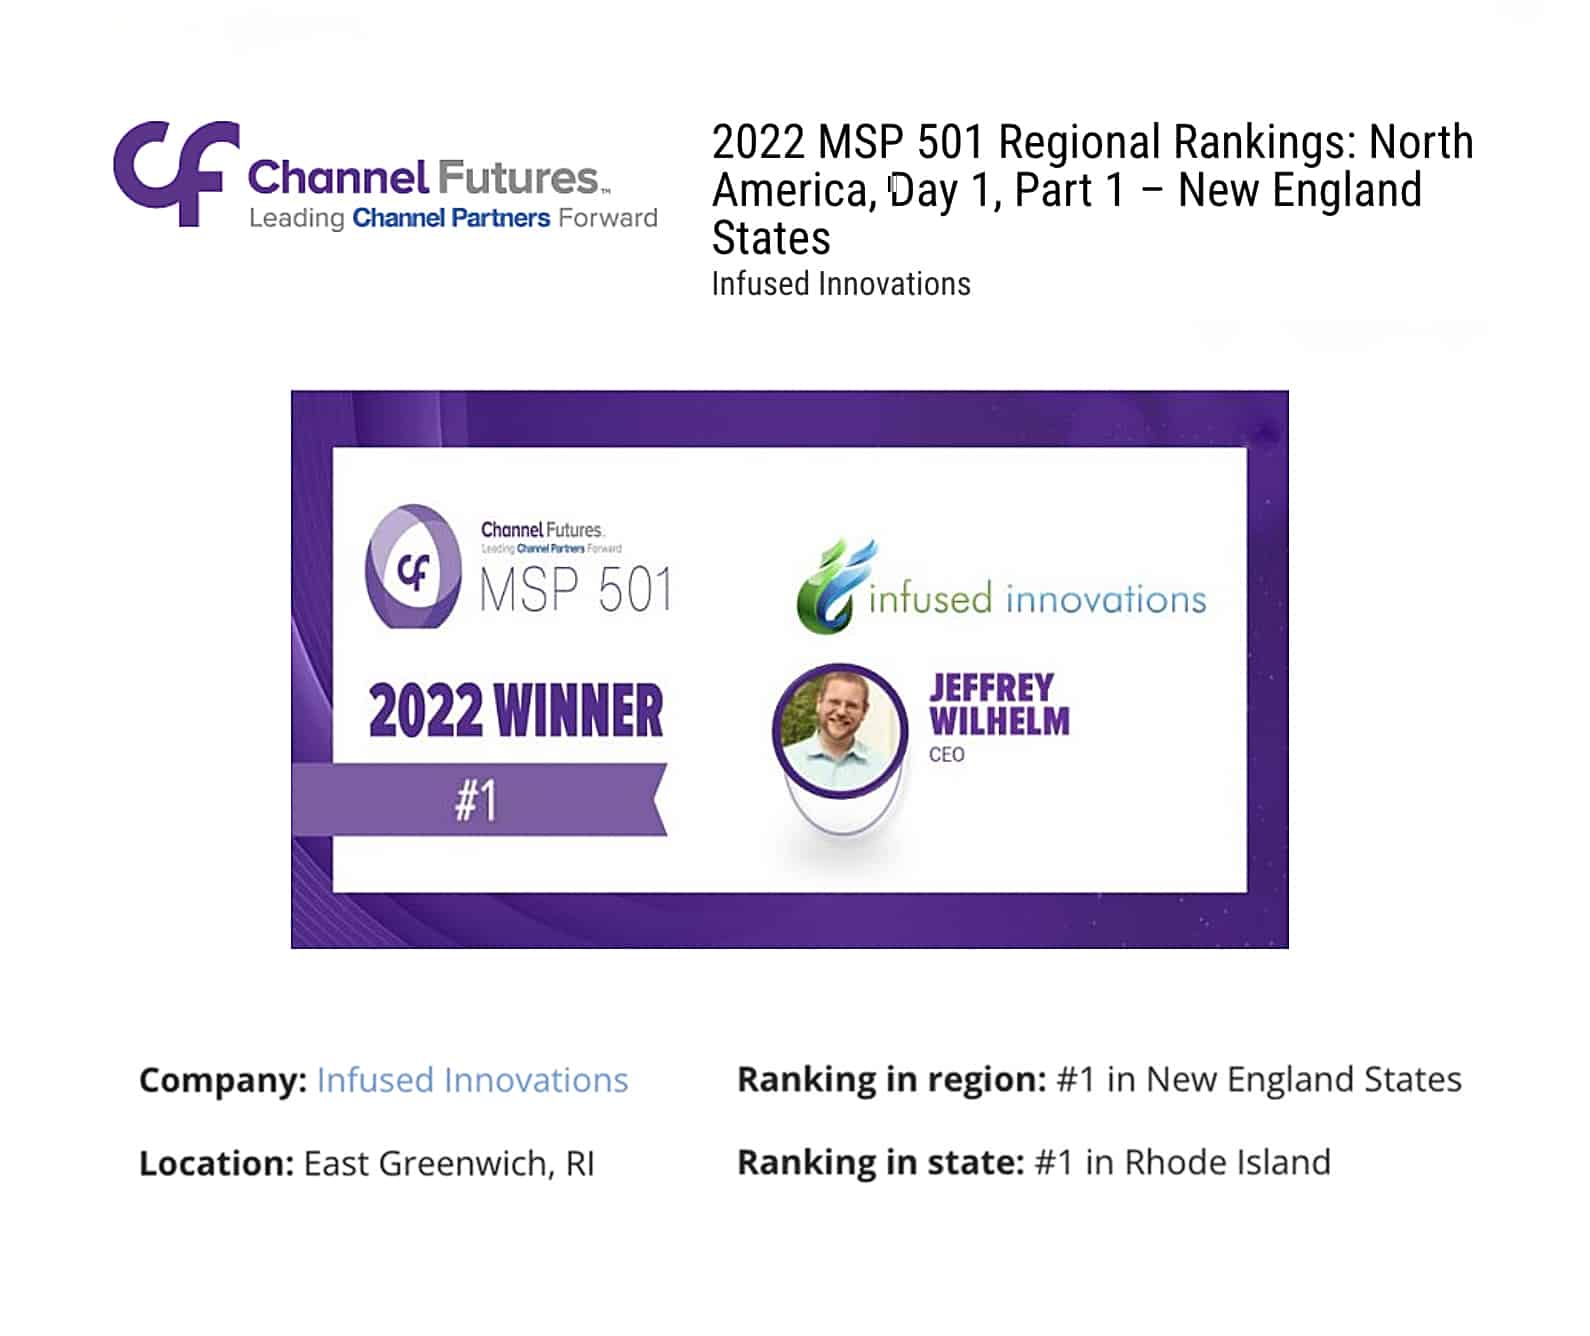 Infused Innovations Places #1 in Channel Futures' 2022 MSP 501 New England Regional Ranking 19